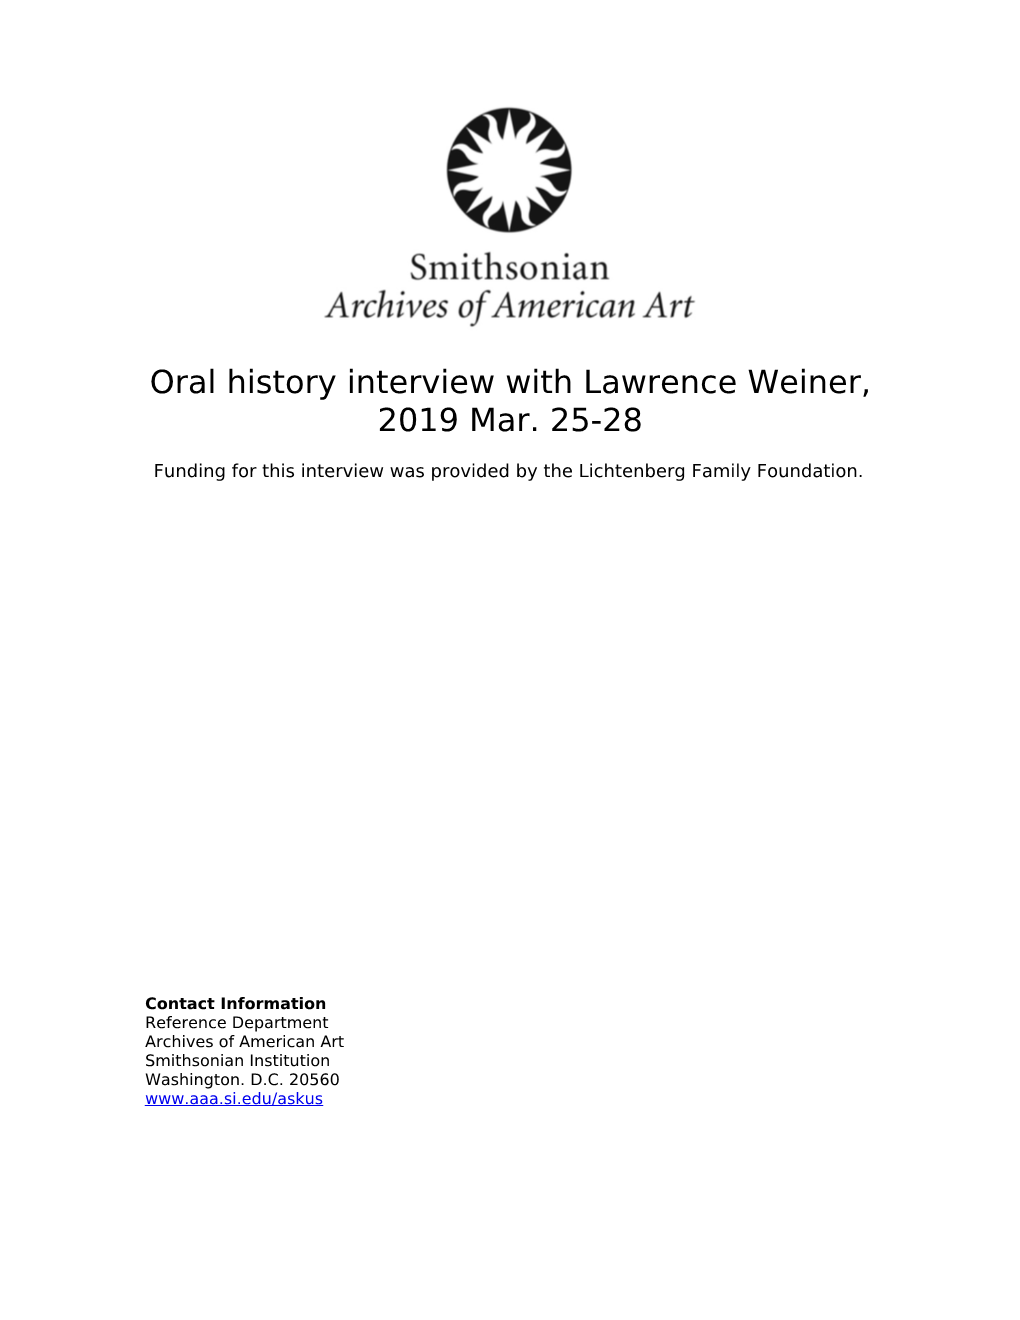 Oral History Interview with Lawrence Weiner, 2019 Mar. 25-28